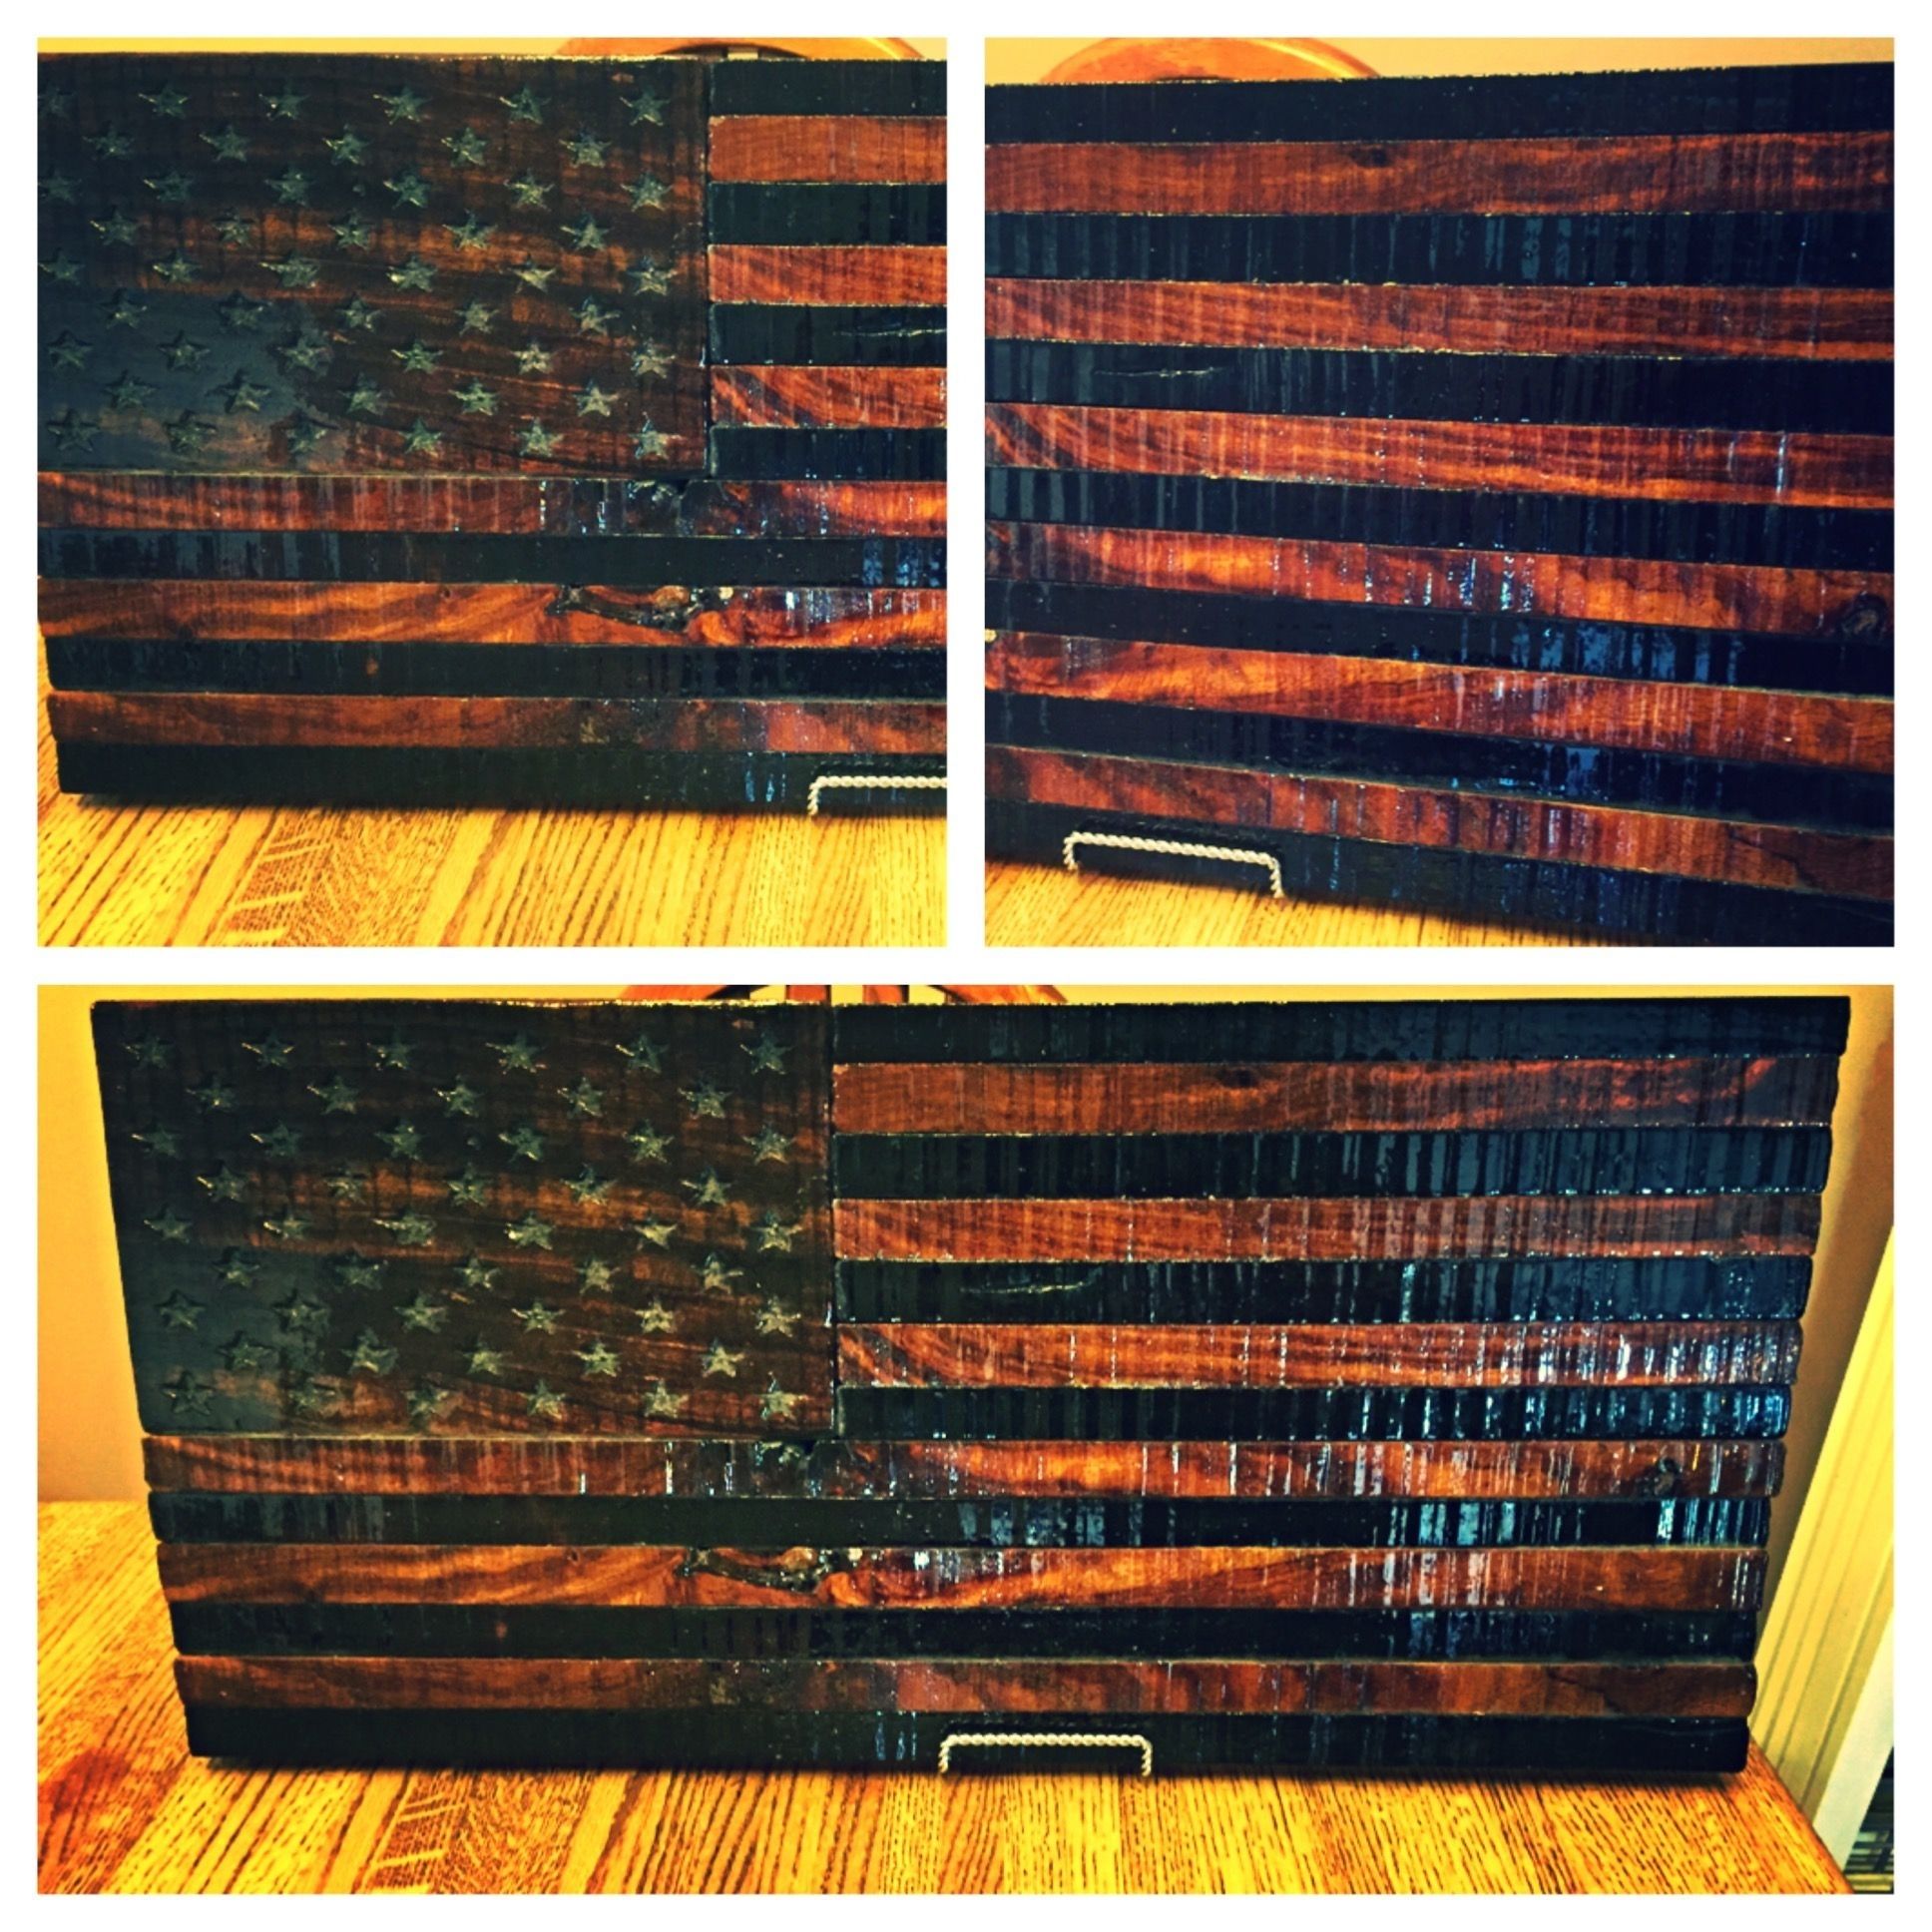 Custom Rustic Wooden American Flagtorched Metal Works Throughout Wooden American Flag Wall Art (View 12 of 20)